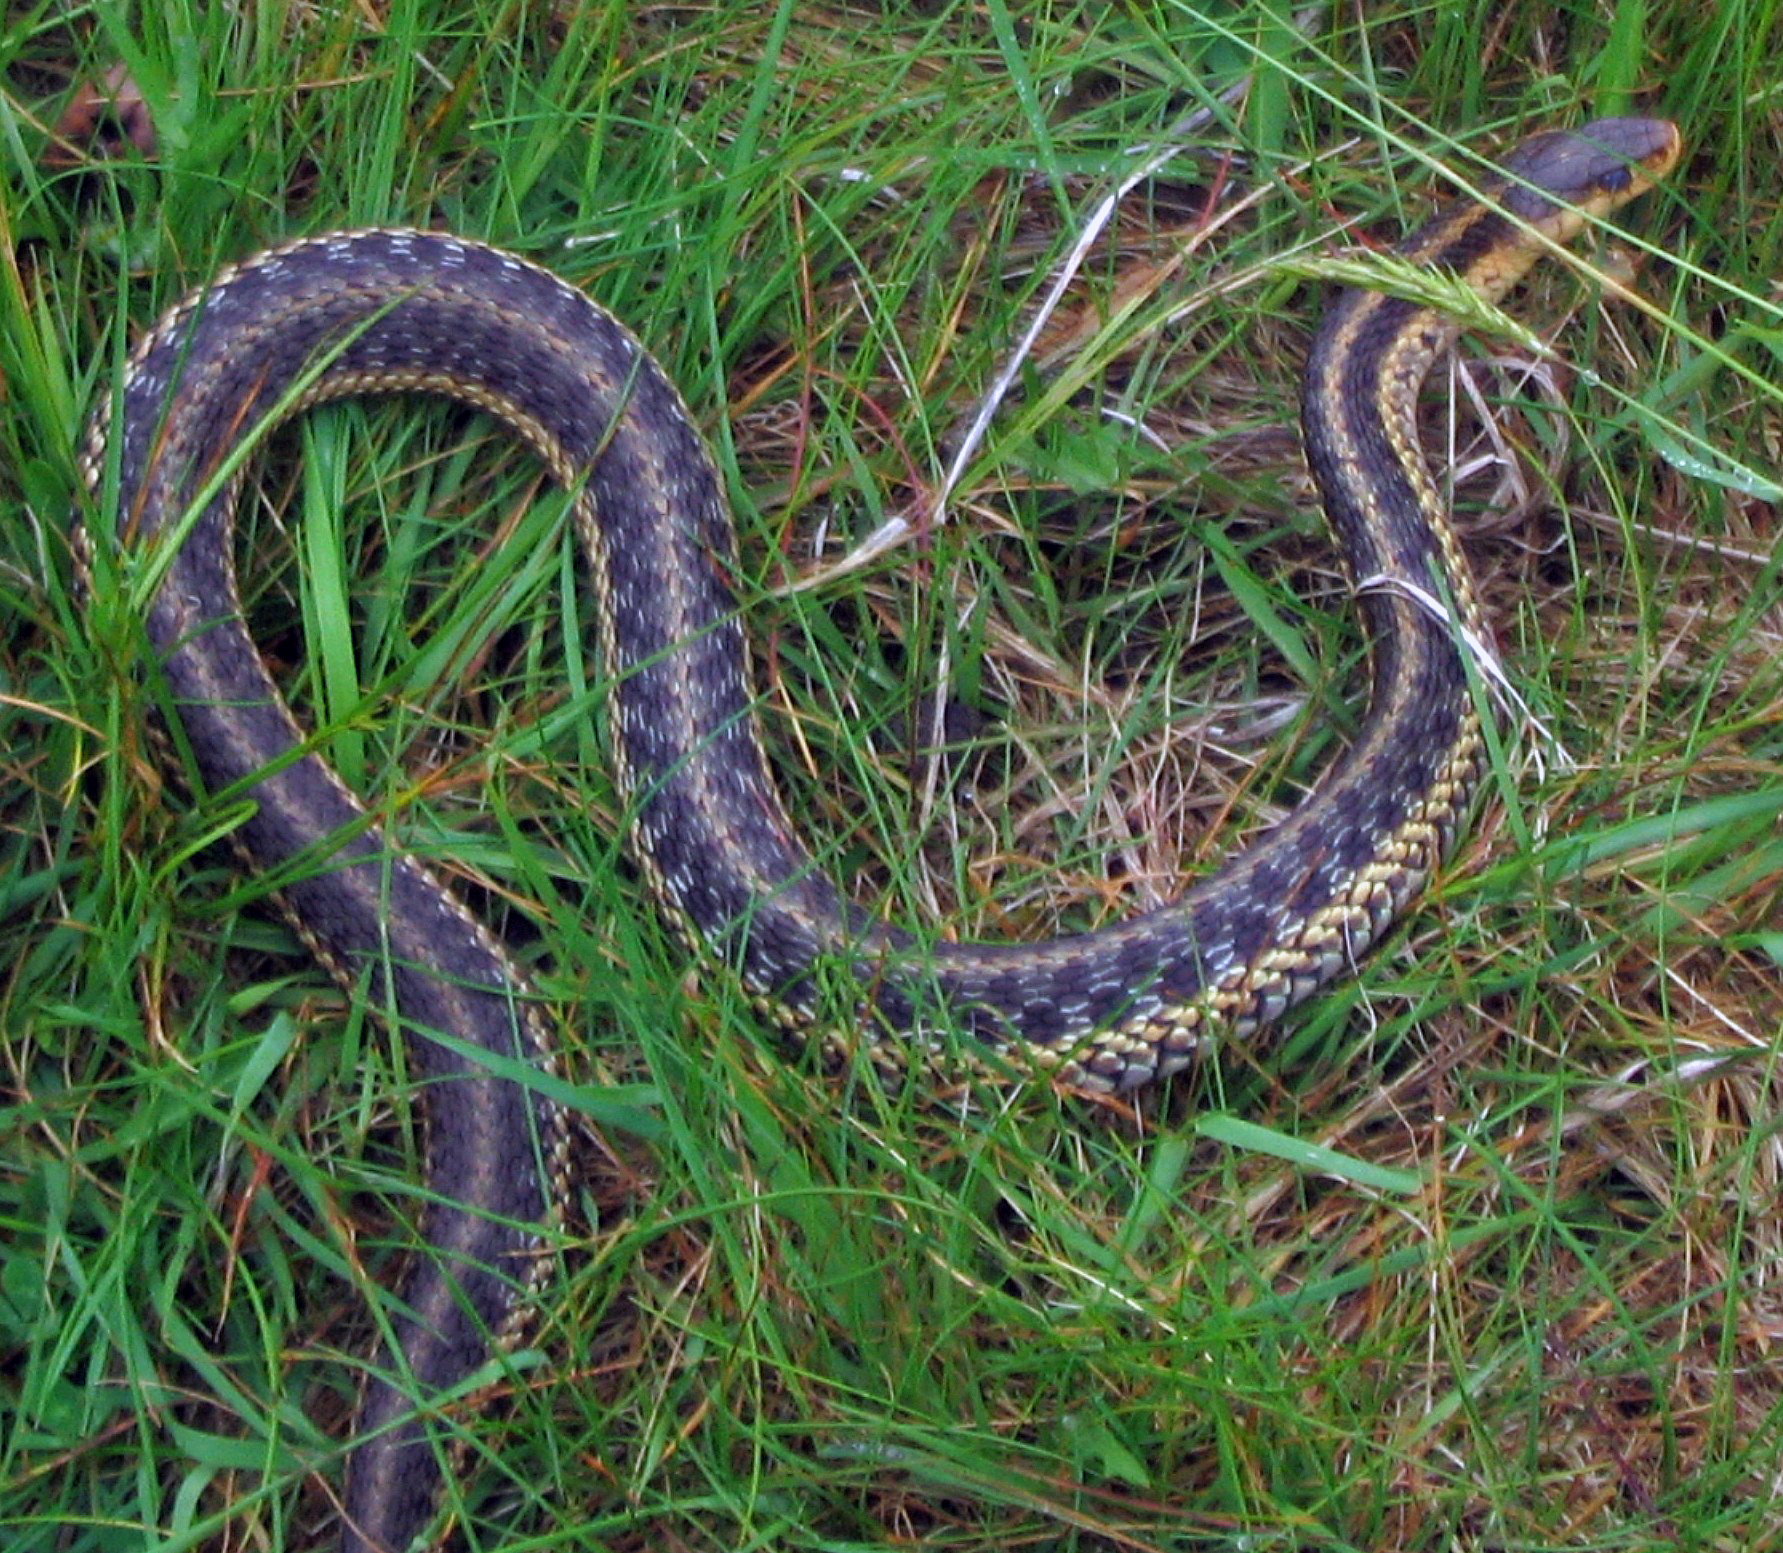 a large brown snake on some green grass